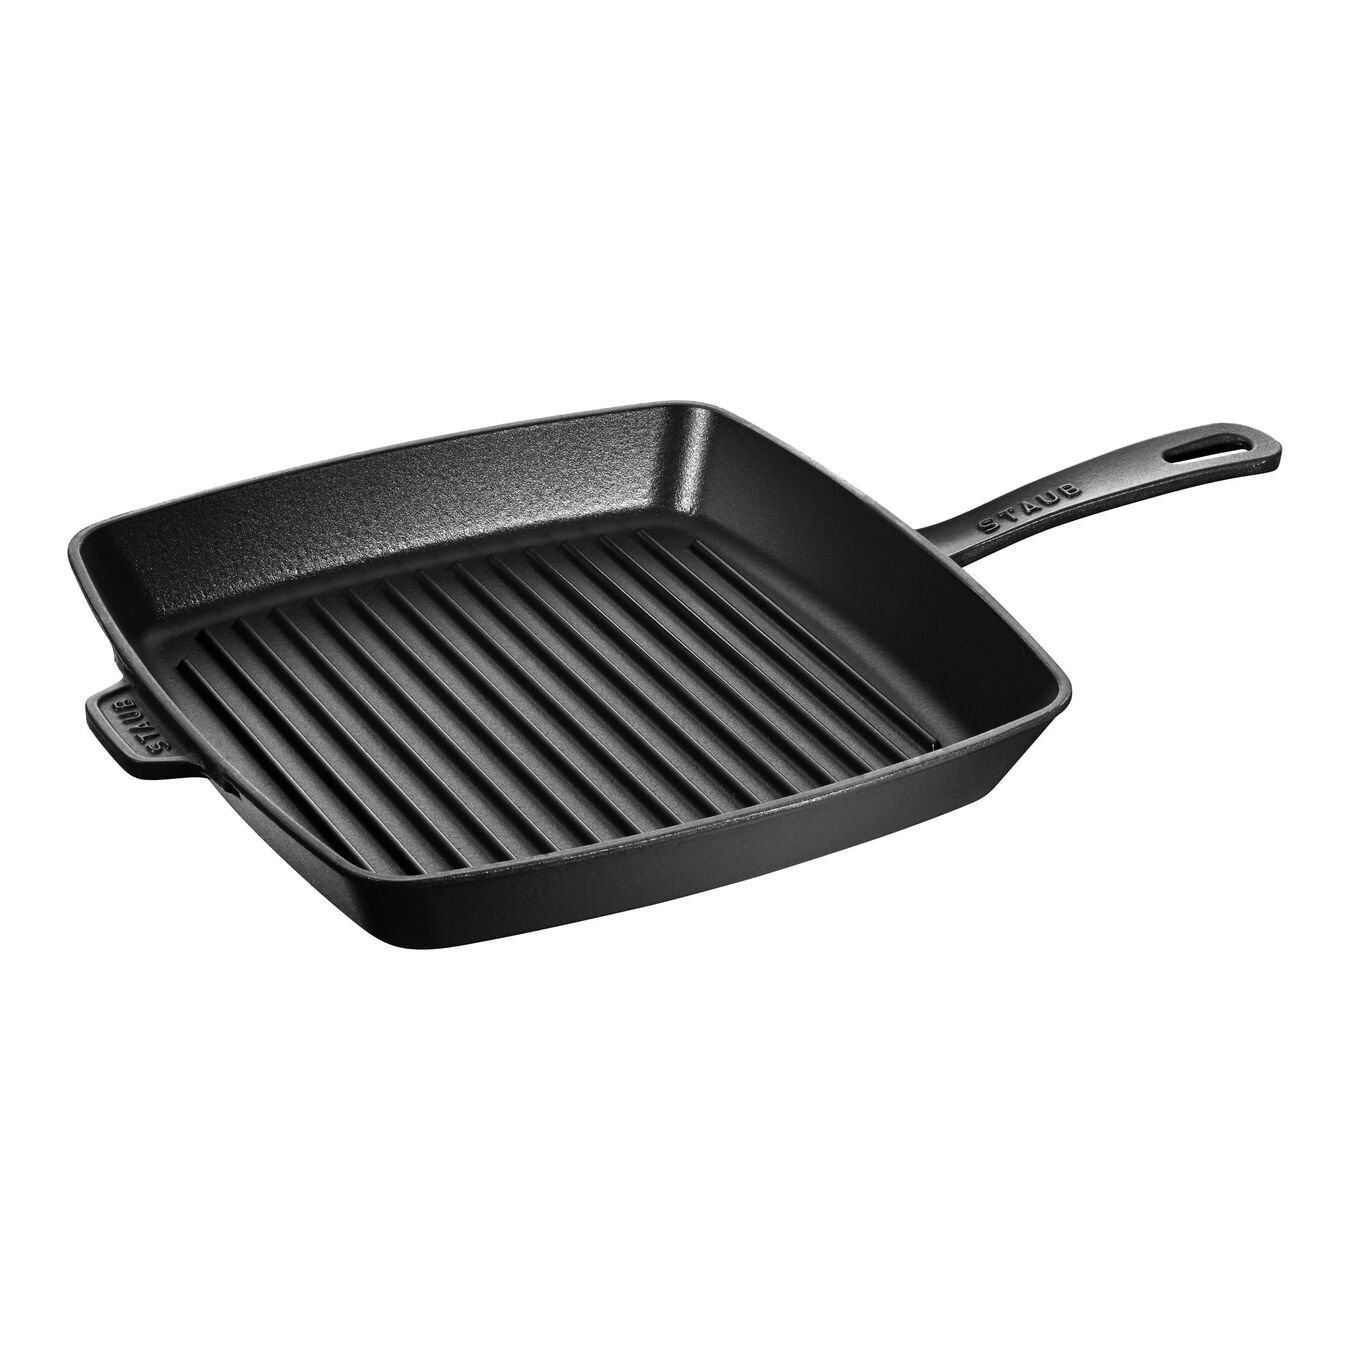 12-inch, cast iron, square, Grill Pan, black matte,,large 1